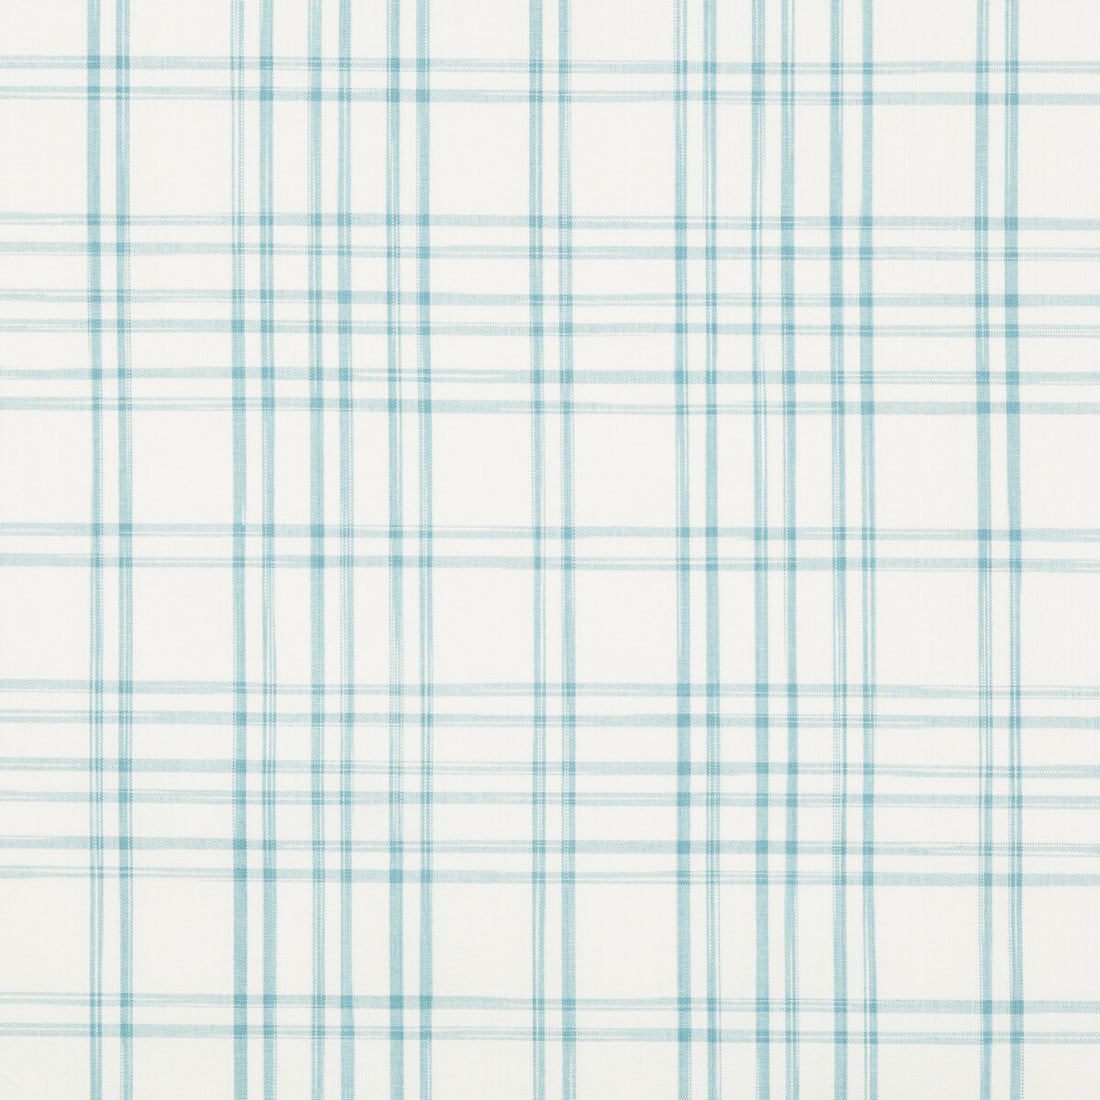 Banon Plaid fabric in turquoise color - pattern 8017100.13.0 - by Brunschwig &amp; Fils in the Durance collection